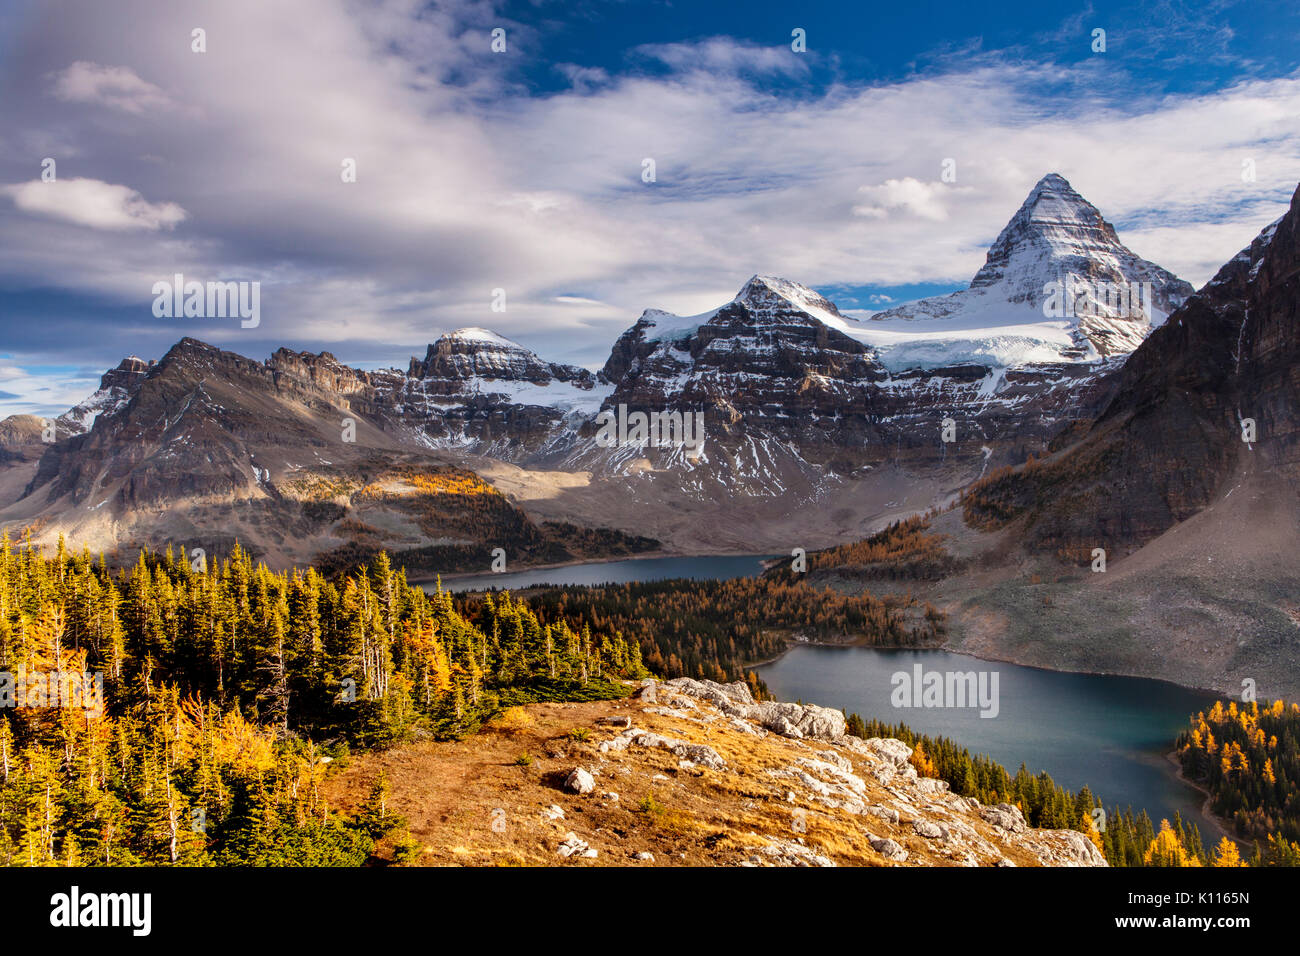 Mount Assiniboine aboe Lake Magog and Lake Cerrulean amidst fall larches, Mount Assiniboine Provincial Park, Rocky Mountains, British Columbia, Canada Stock Photo